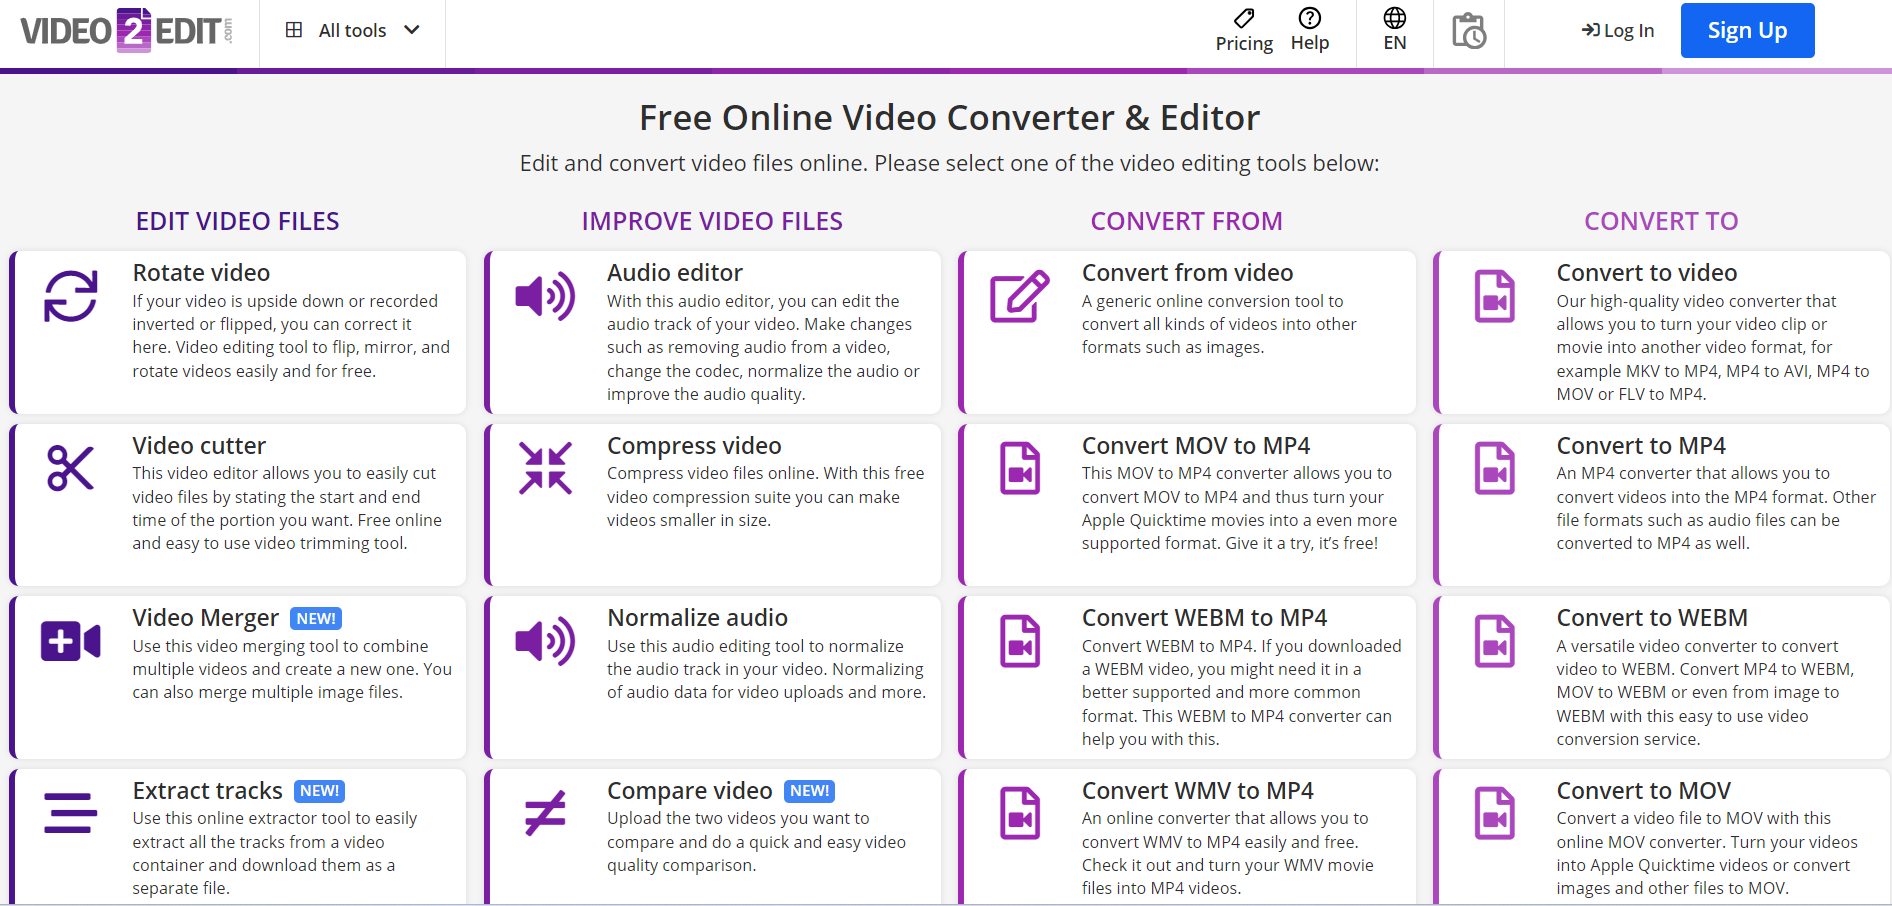 Video2edit-Best-for-Supported-Video-File-Format